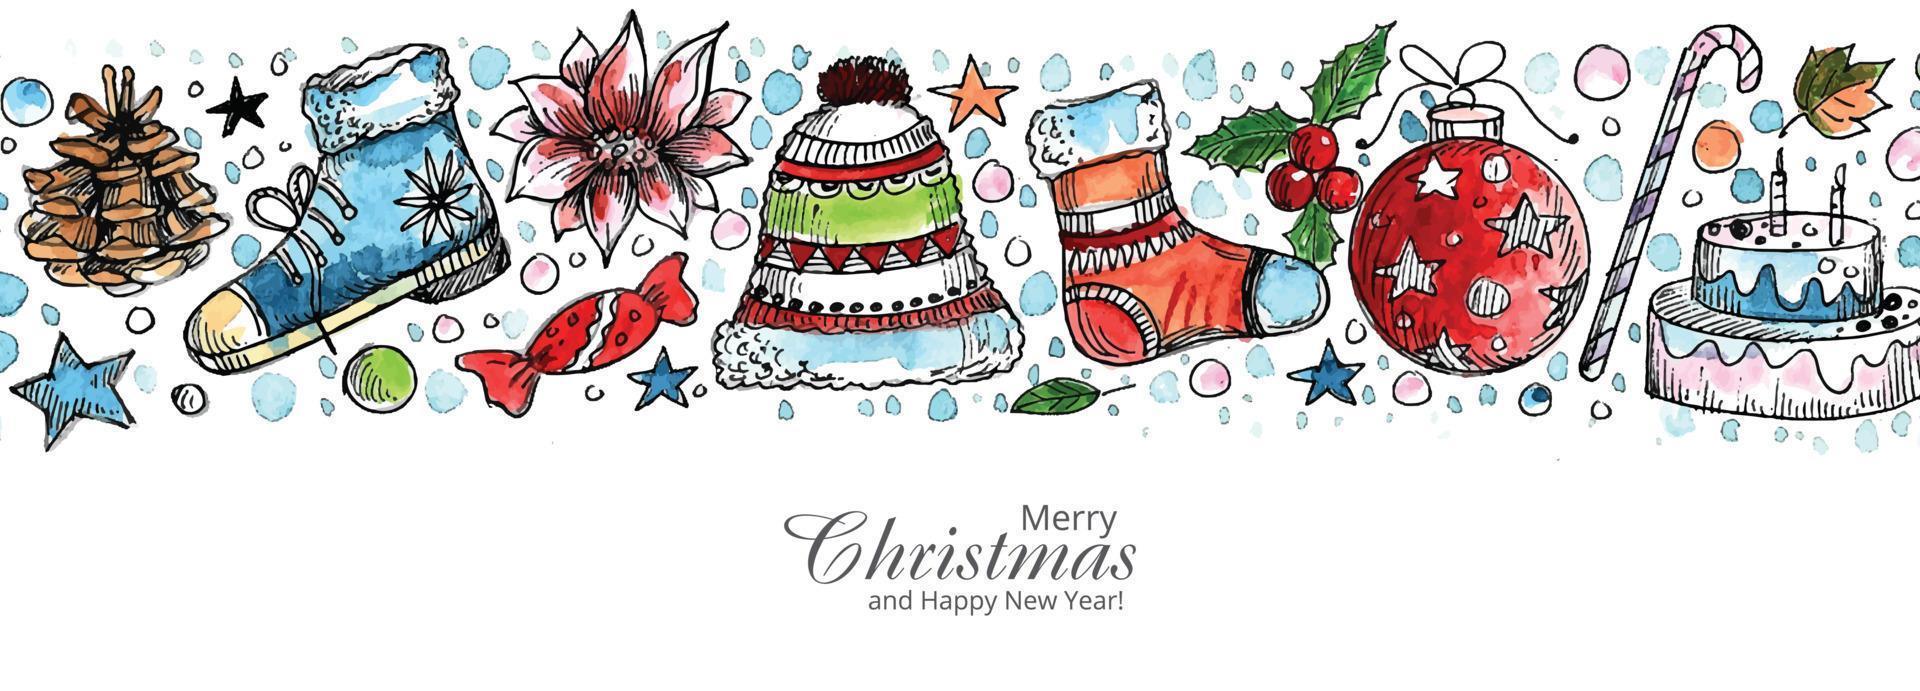 Beautiful christmas holiday card banner background vector